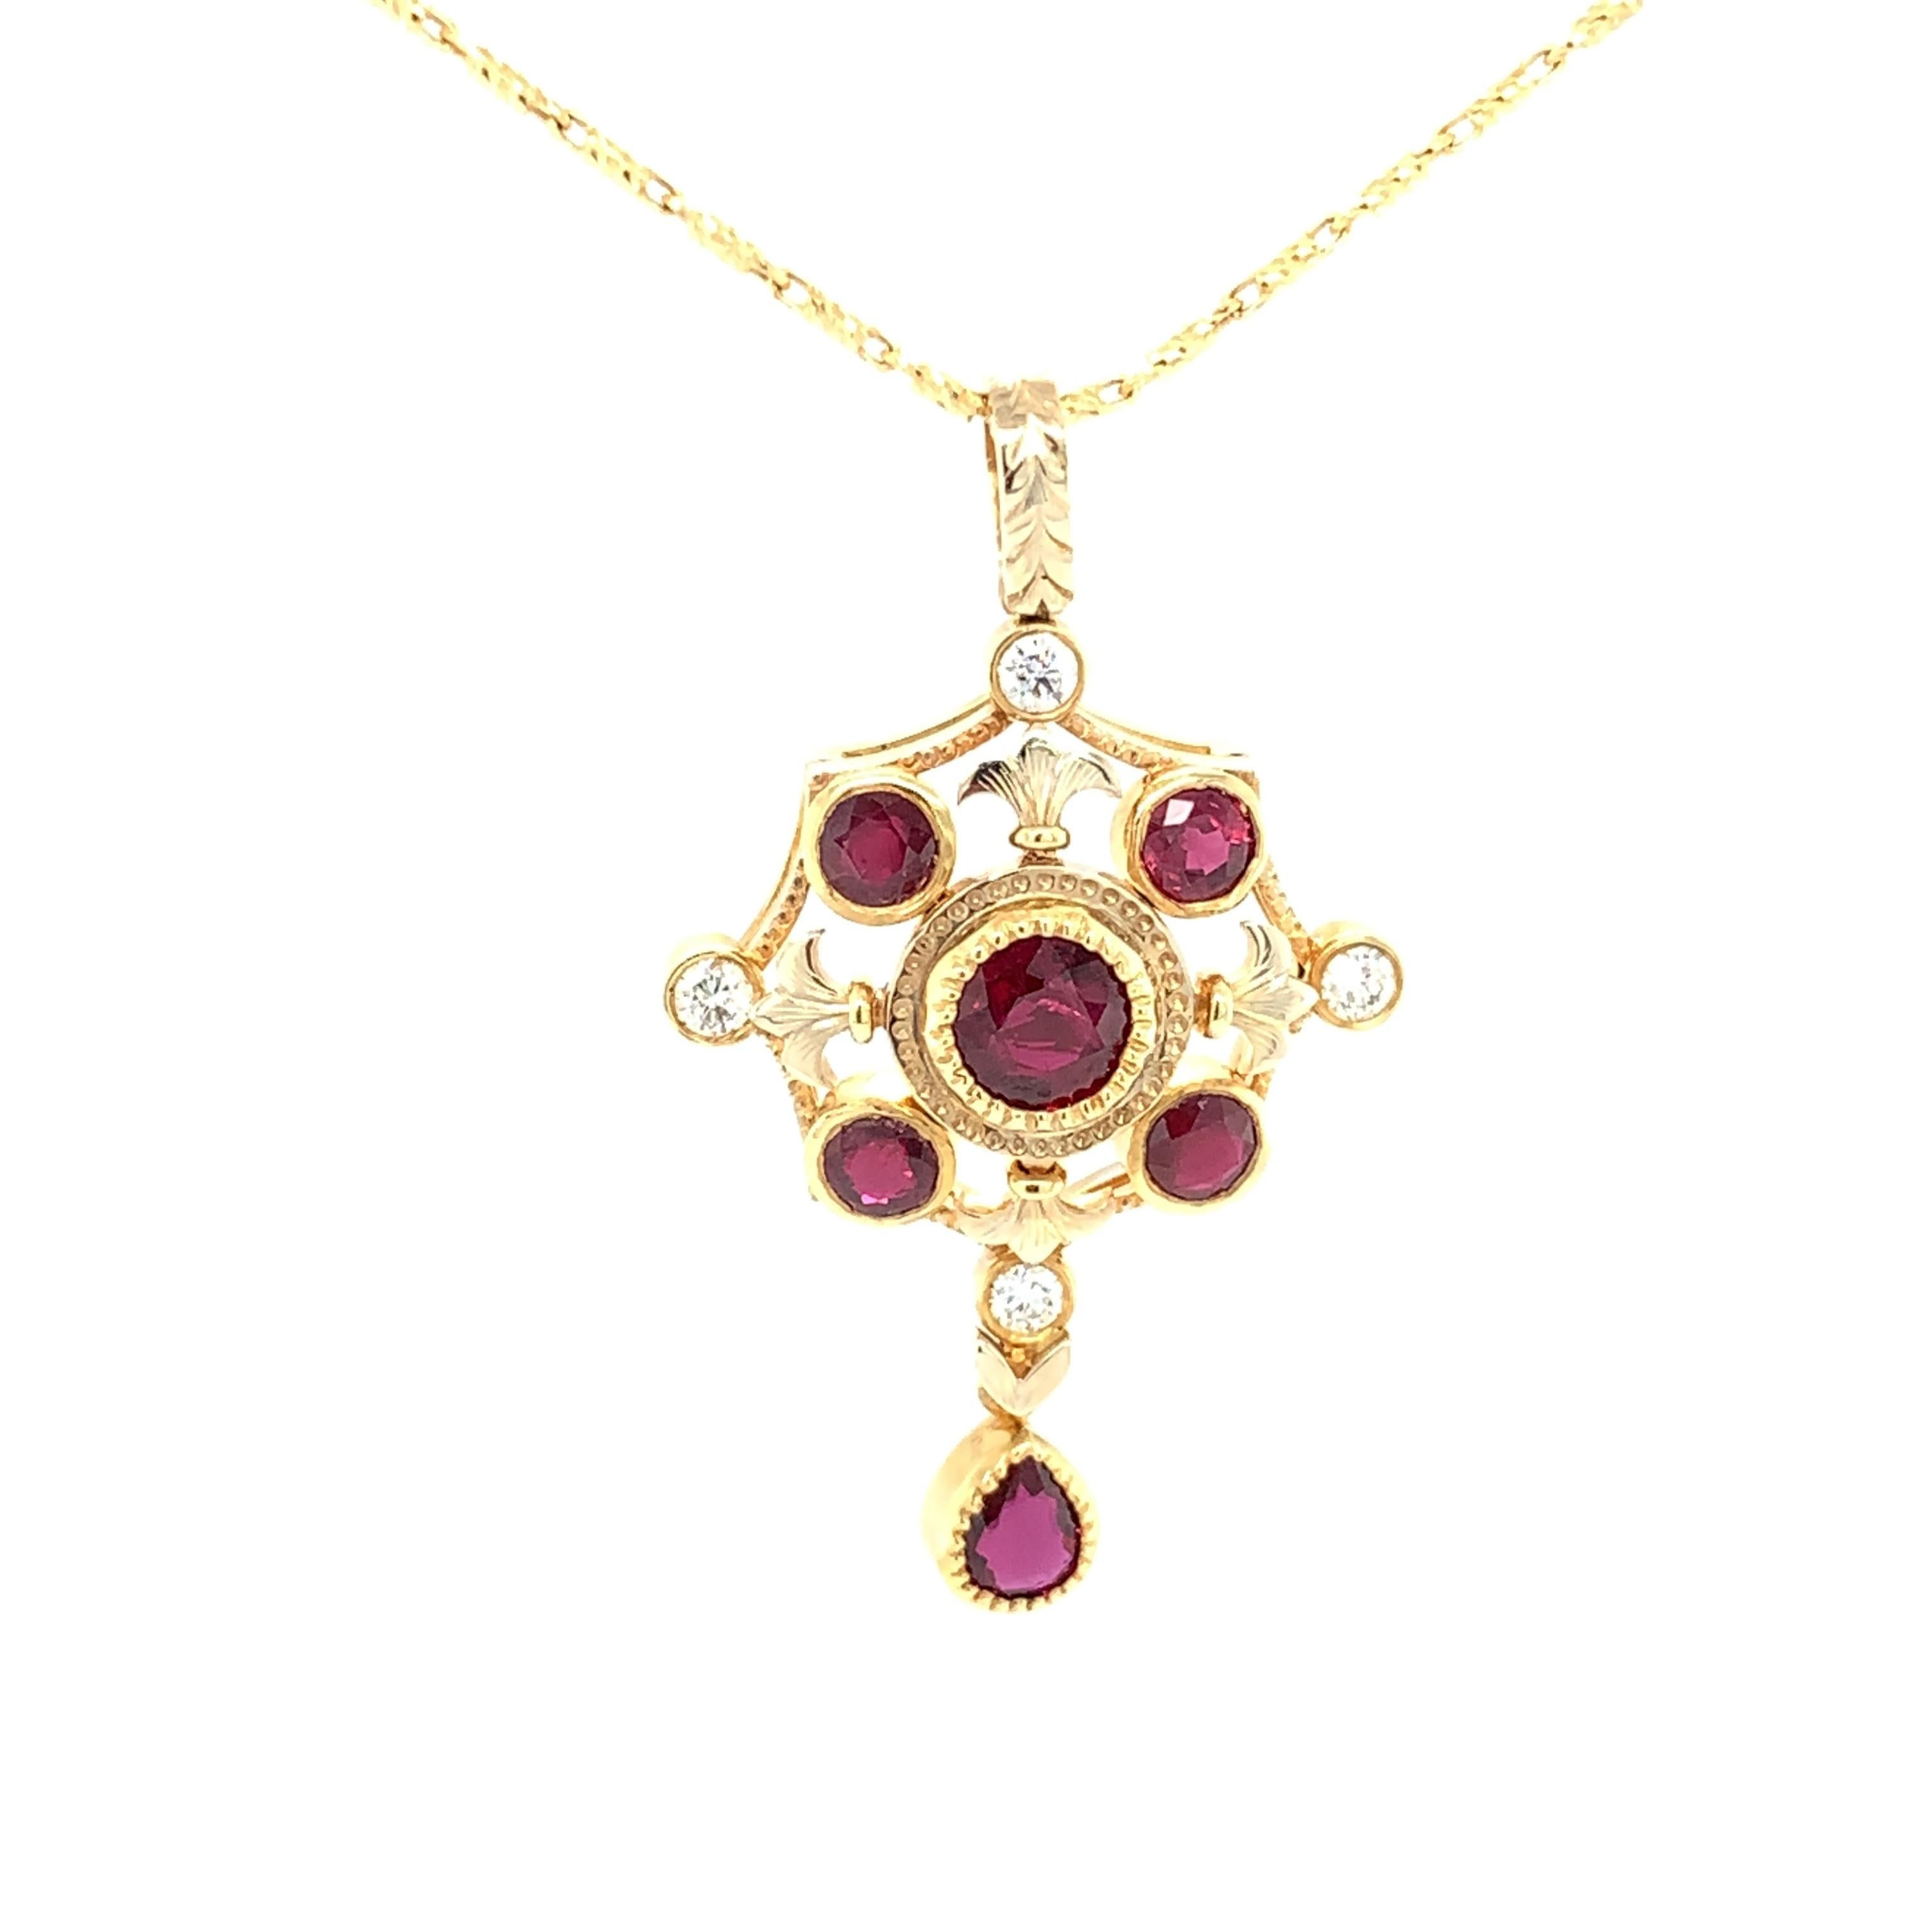 This beautiful pendant features gorgeous red rubies and sparkling white diamonds, set in an original, elegant design. Handcrafted in 18k yellow gold by our Master Jewelers in Los Angeles, this piece has a Renaissance style and timeless feel. The